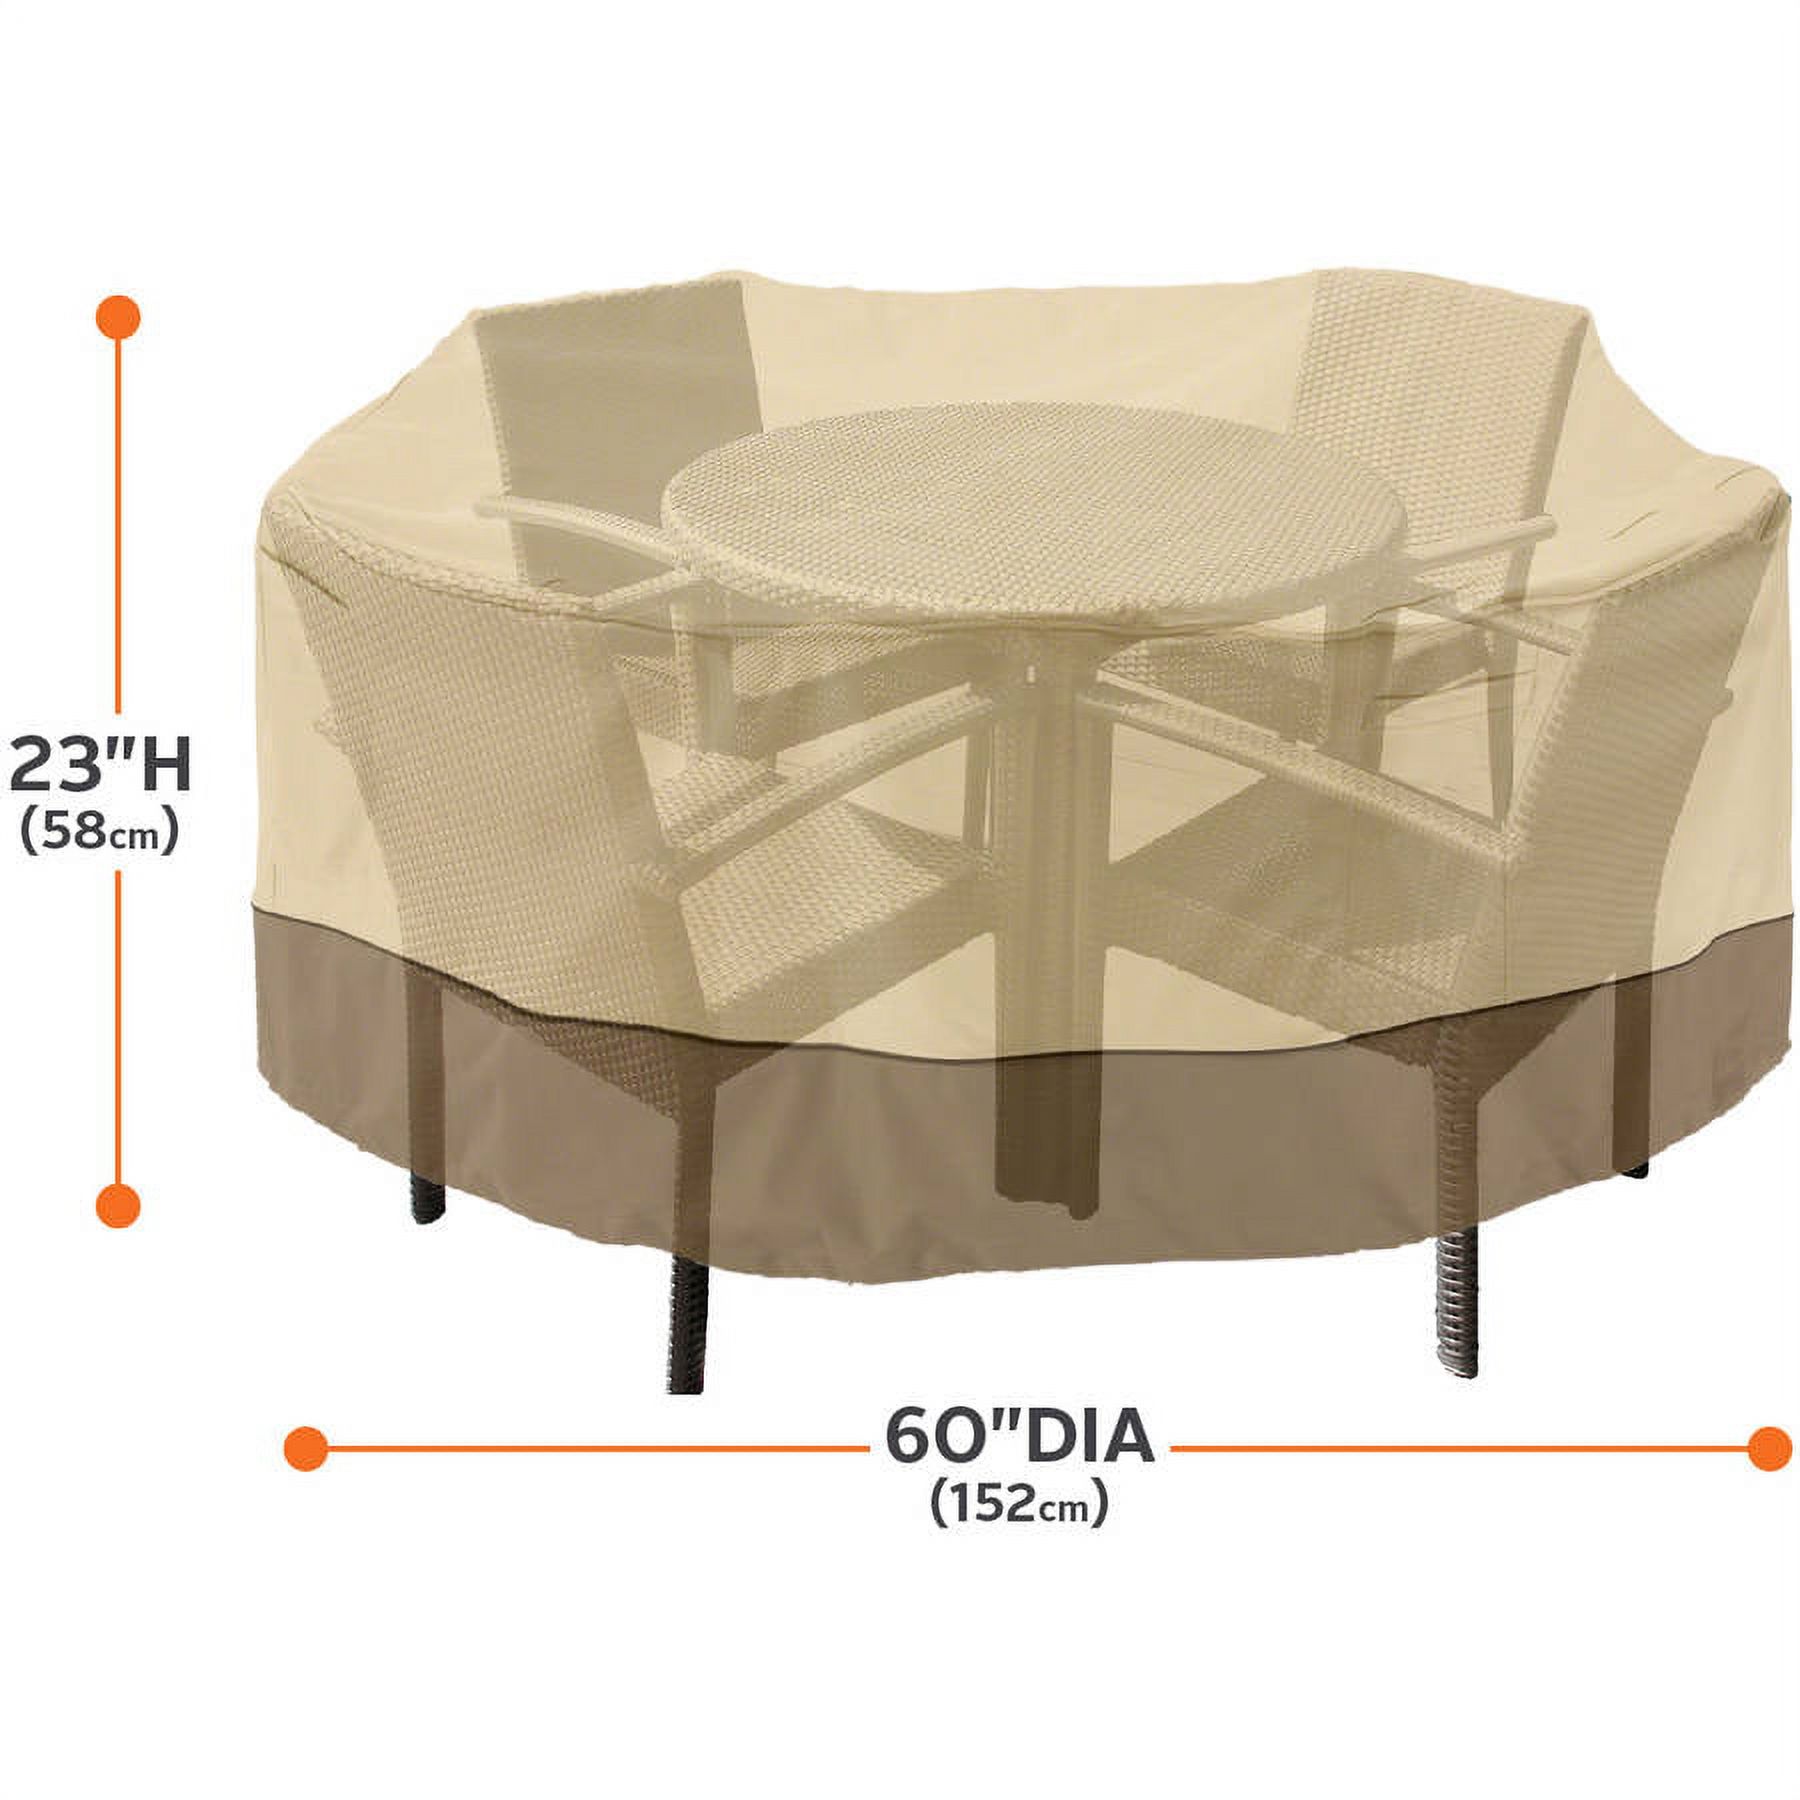 Classic Accessories Veranda Round Patio Table & Chair Set Cover - Durable and Water Resistant Outdoor Furniture Cover, Small (71912) - image 4 of 10